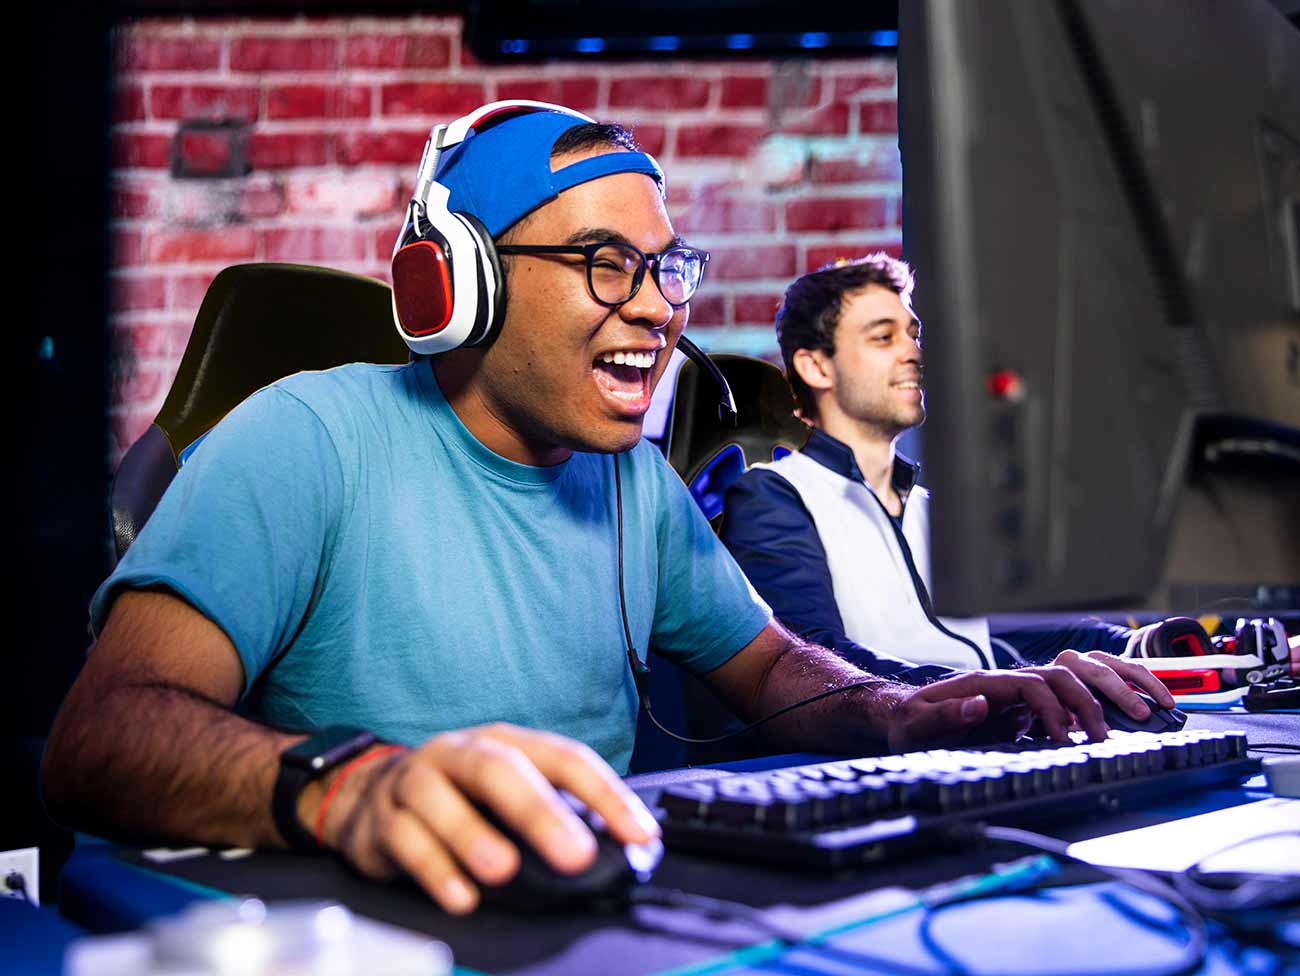 young men smiling and playing a video game